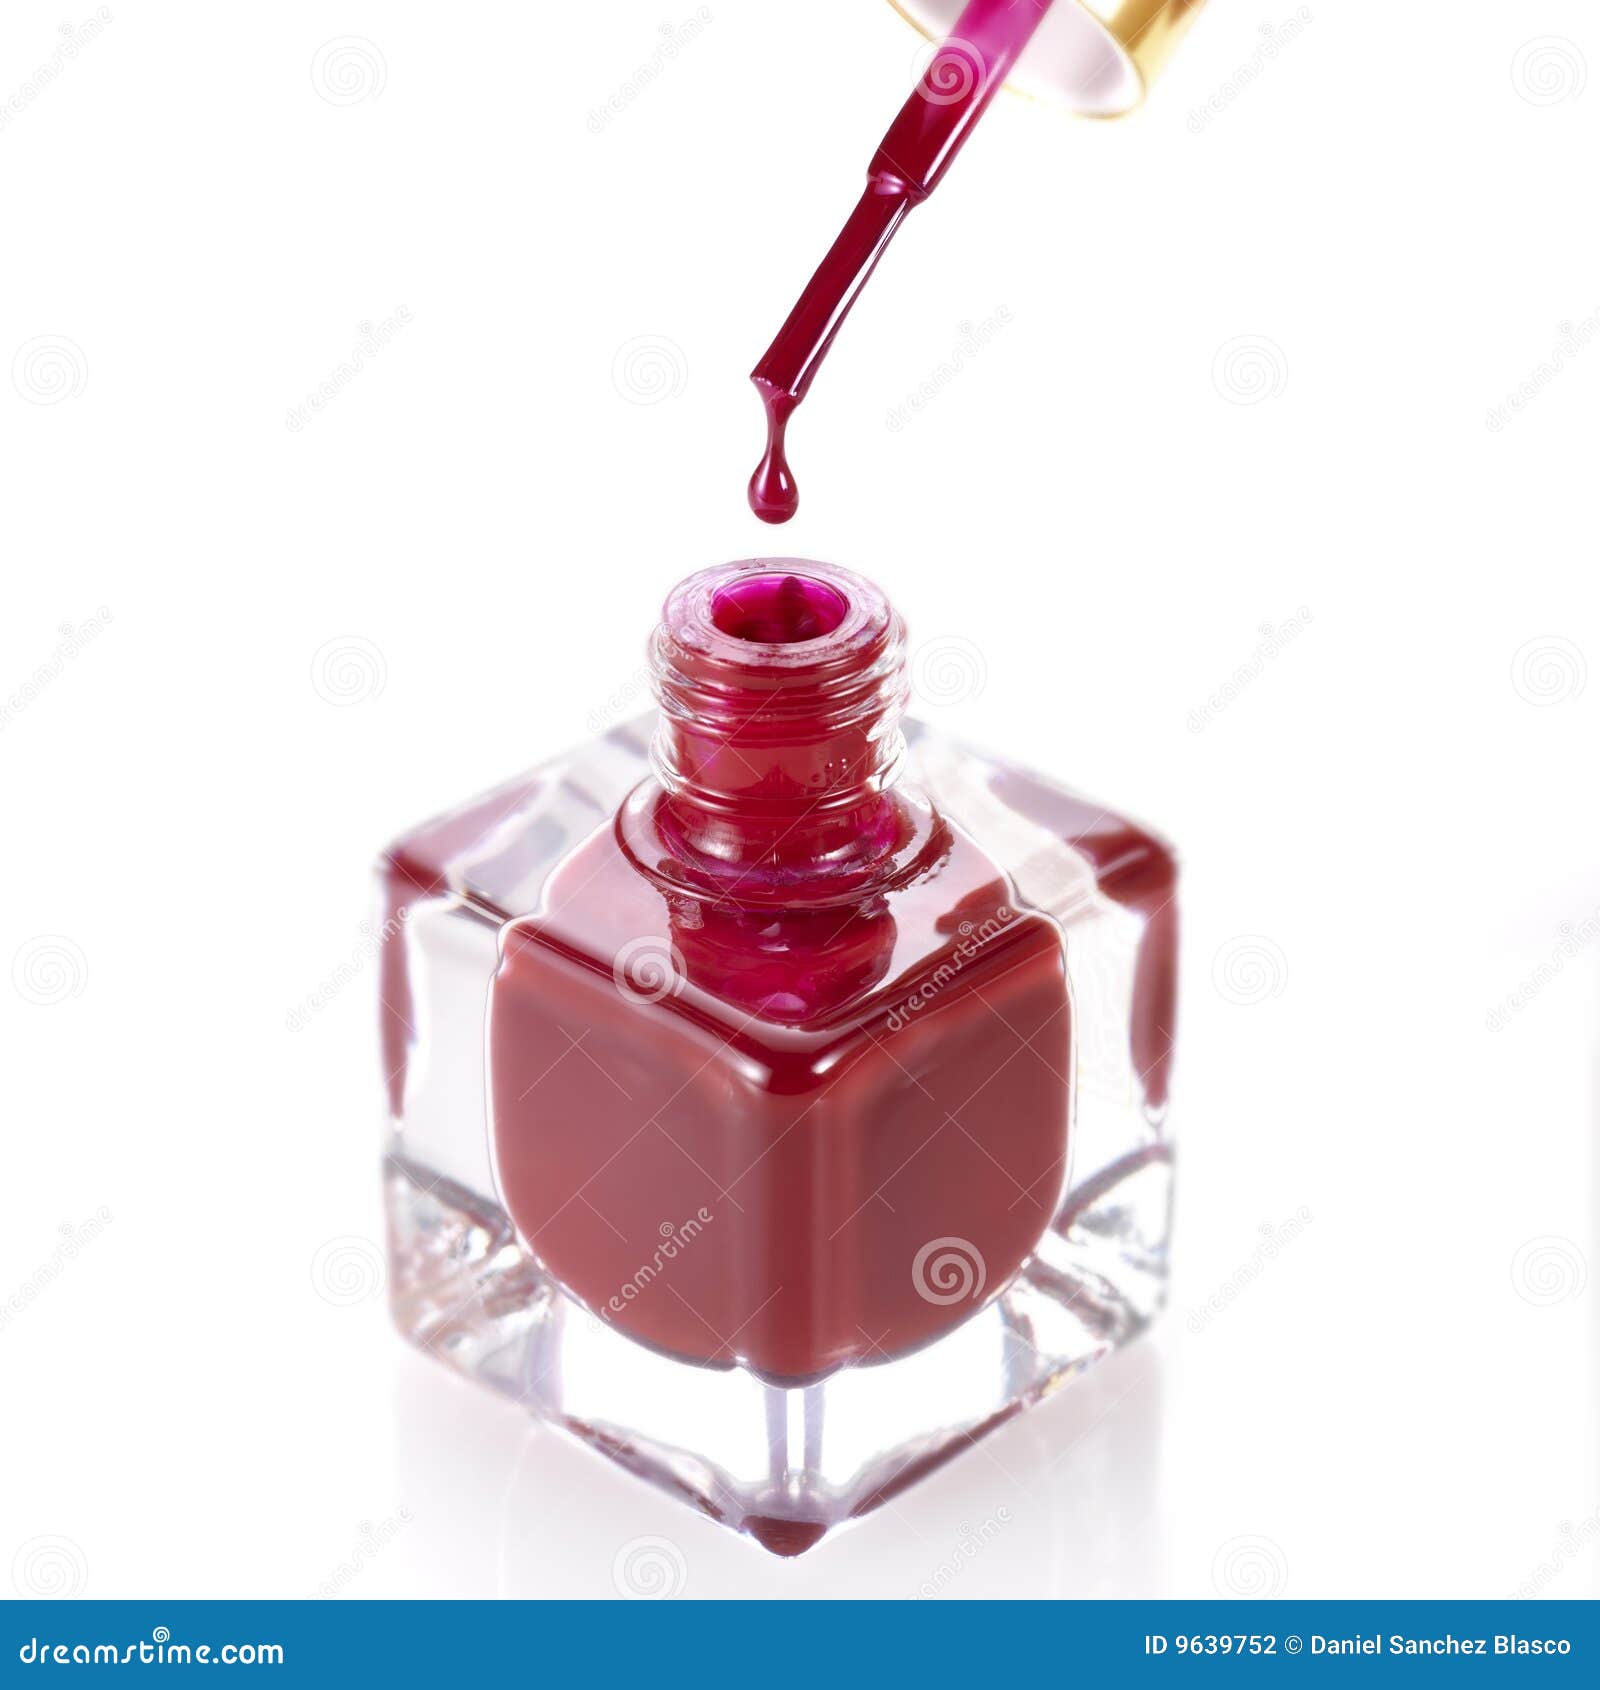 Blue Nail Polish Dripping From Opened Bottle on White Background, Stock  Footage